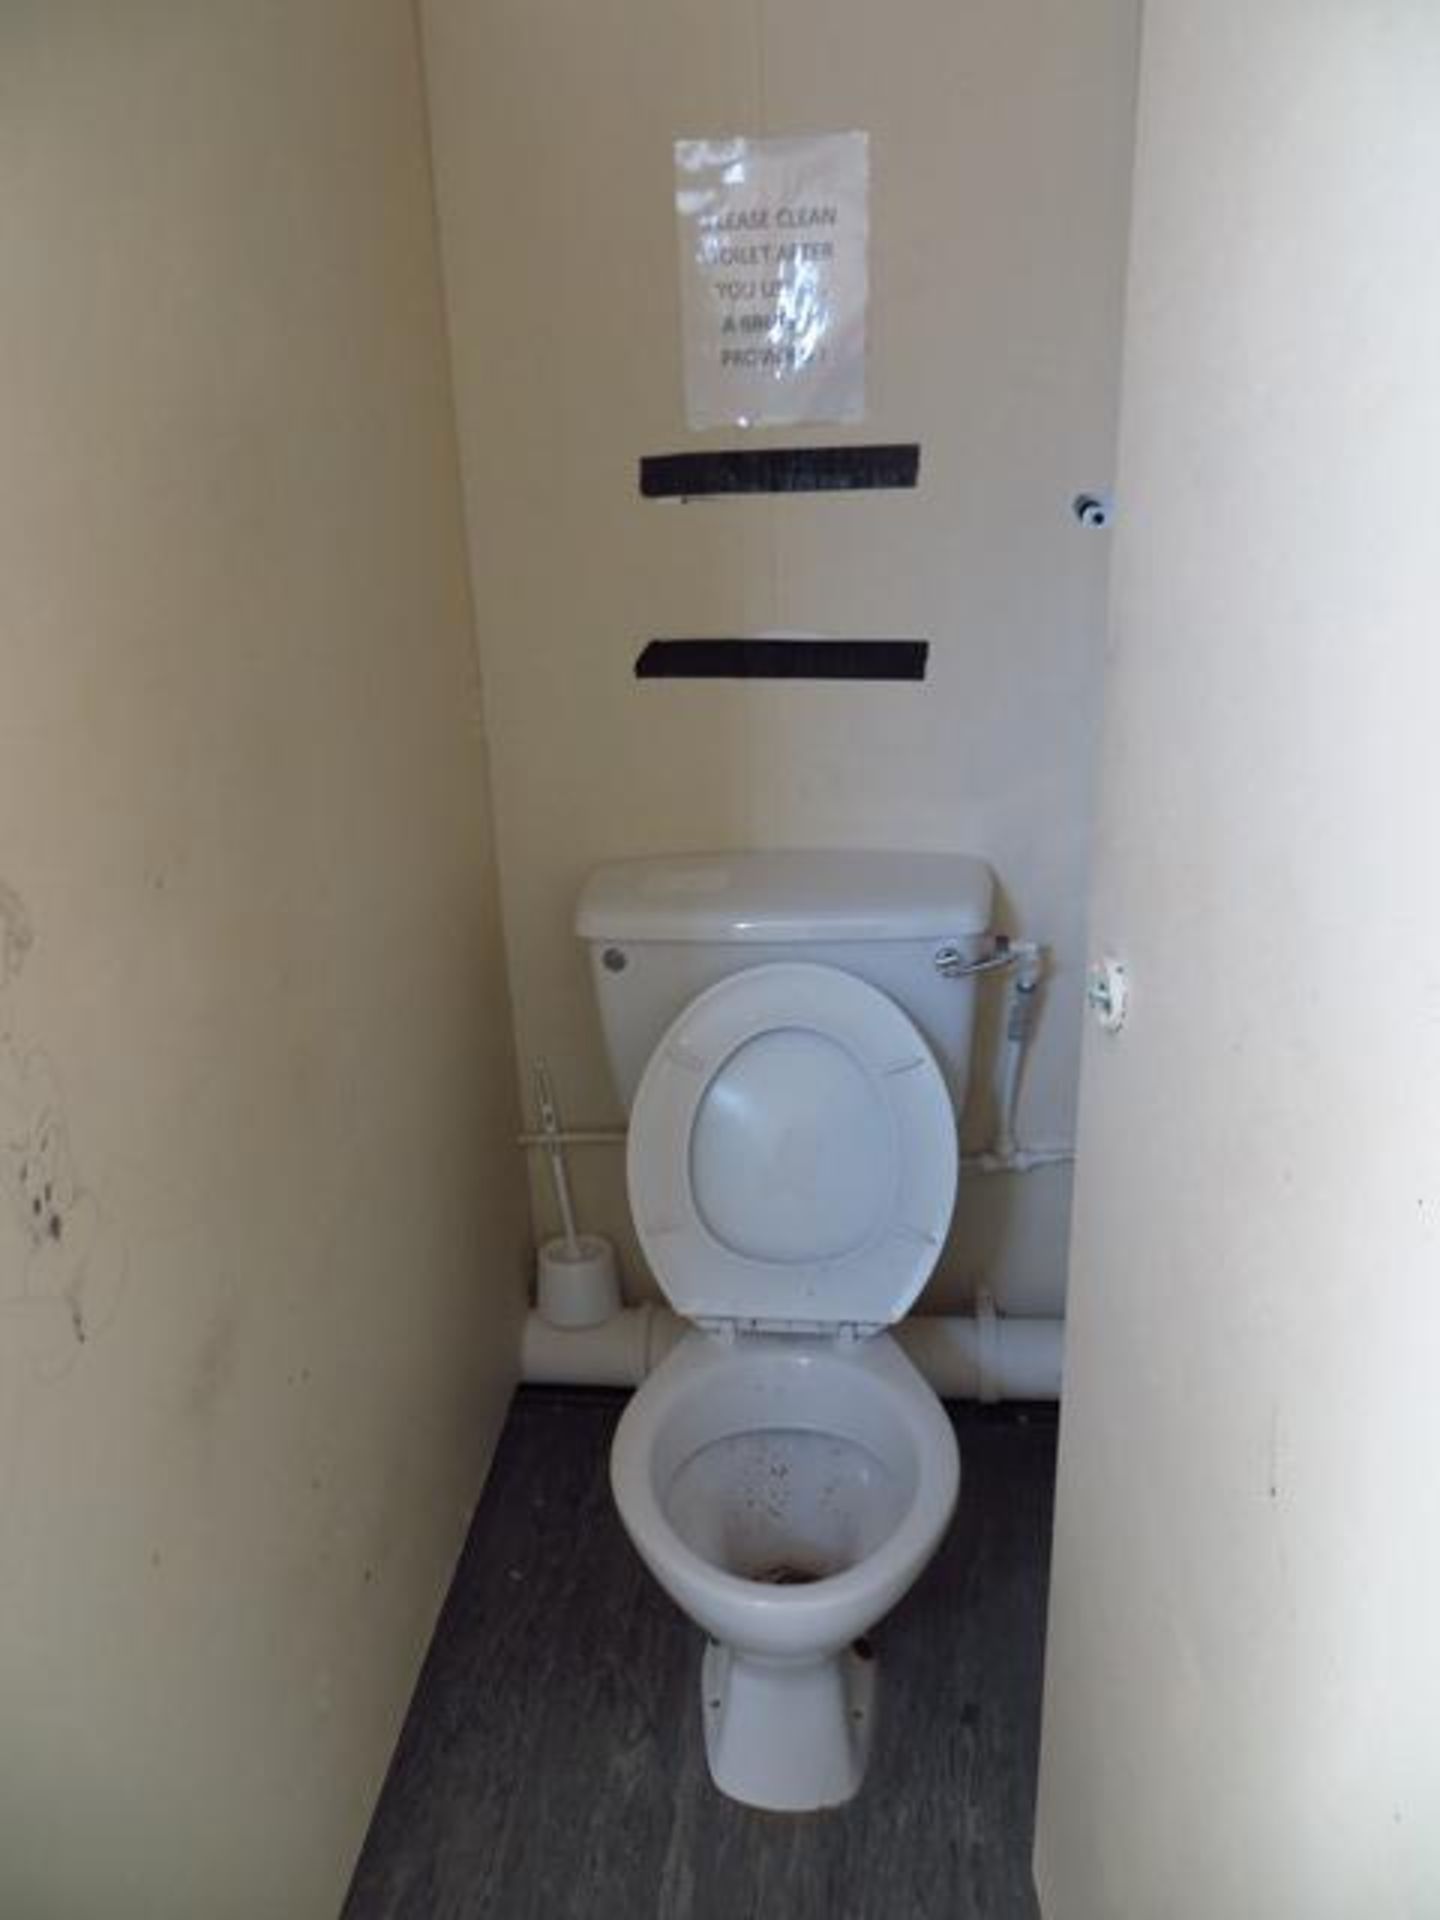 21' x 9' Steel Container Split WC 4 Cubicles & large Urinal c/w Separate Ladies Toilet Cubicle - Image 6 of 7